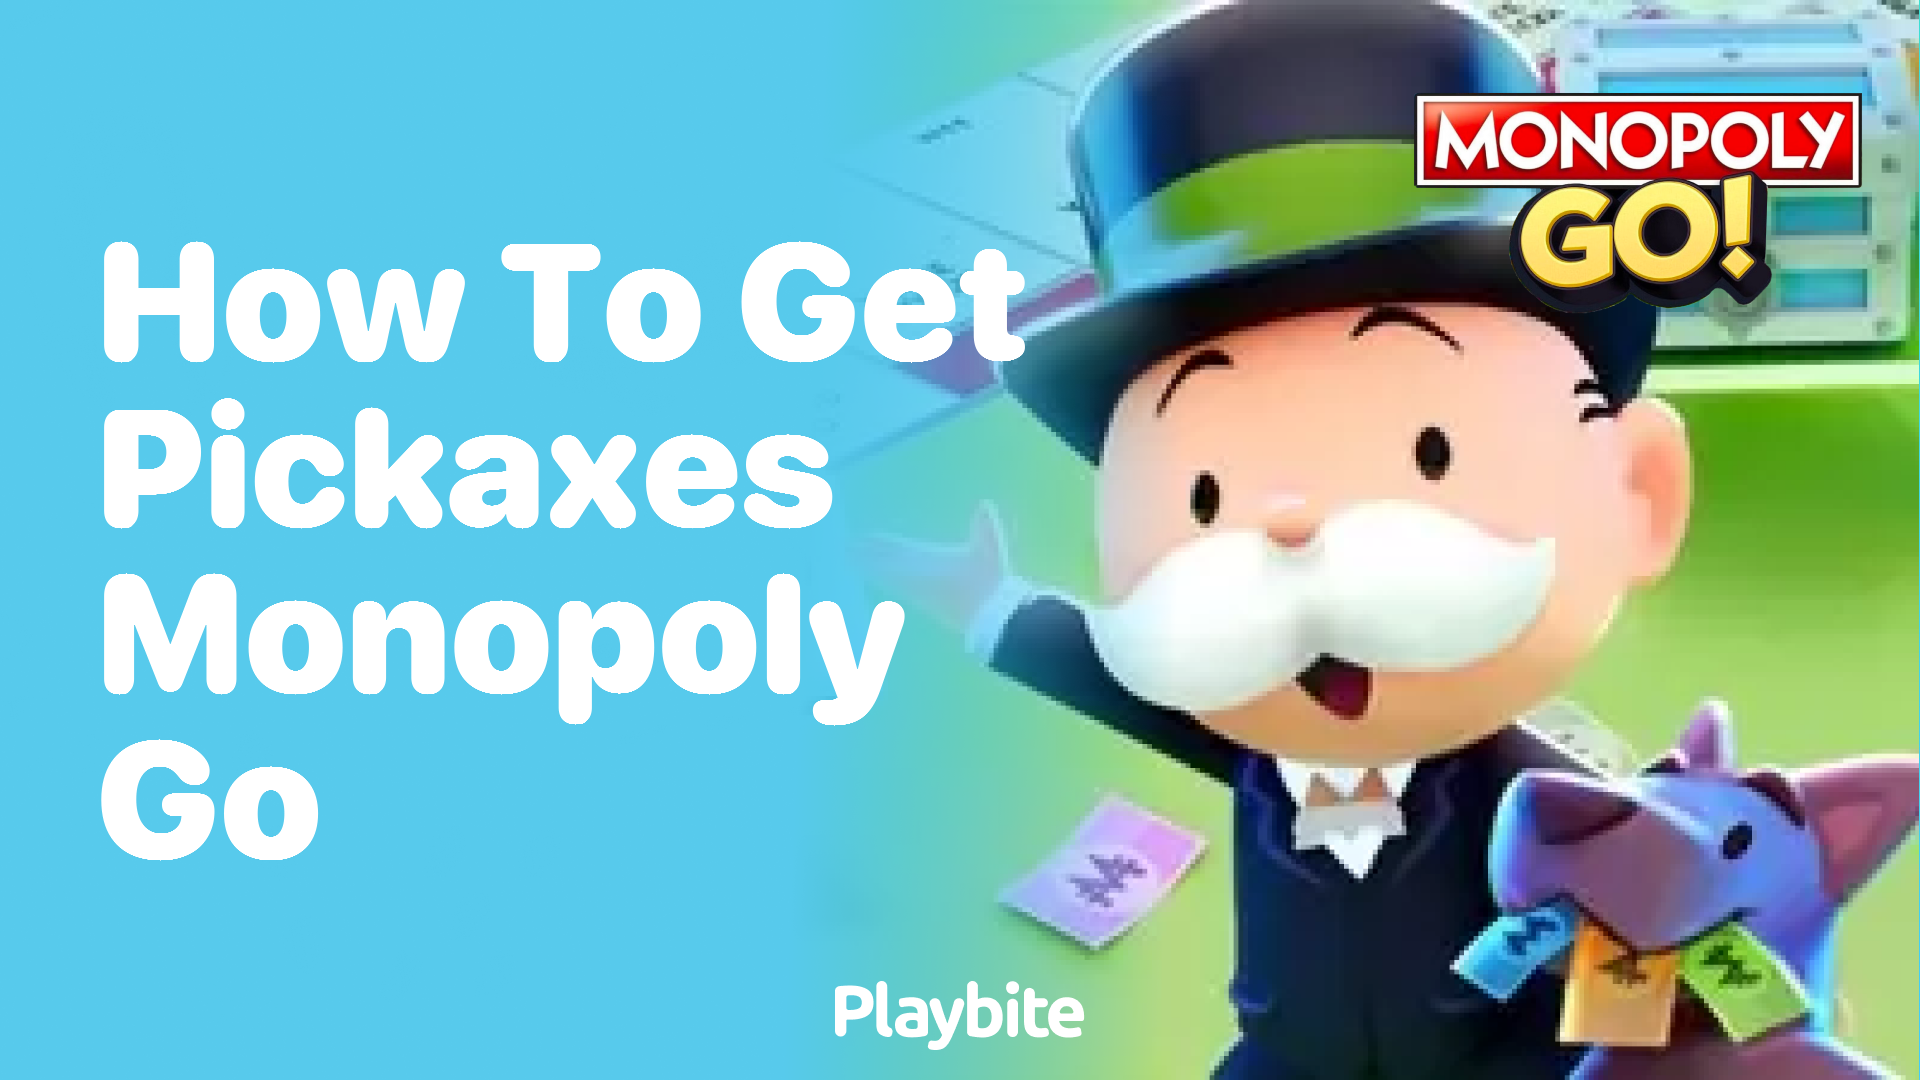 How to Get Pickaxes in Monopoly Go